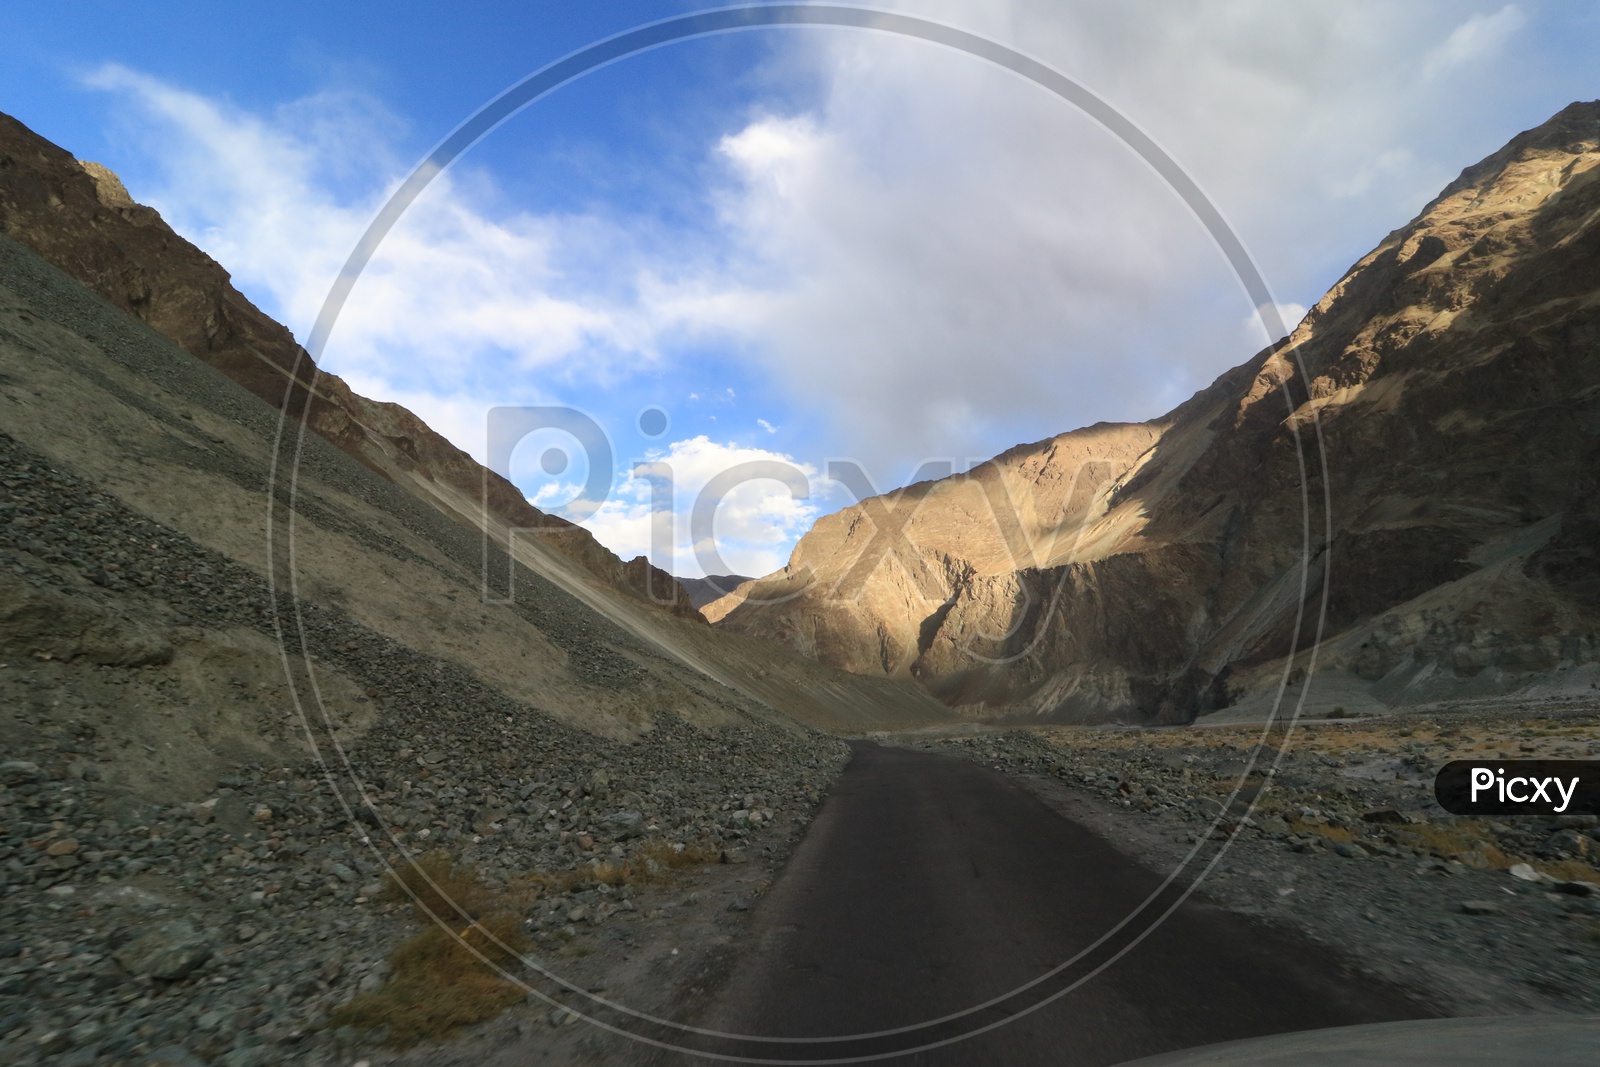 Roadways of leh with beautiful mountains in the backgroundr